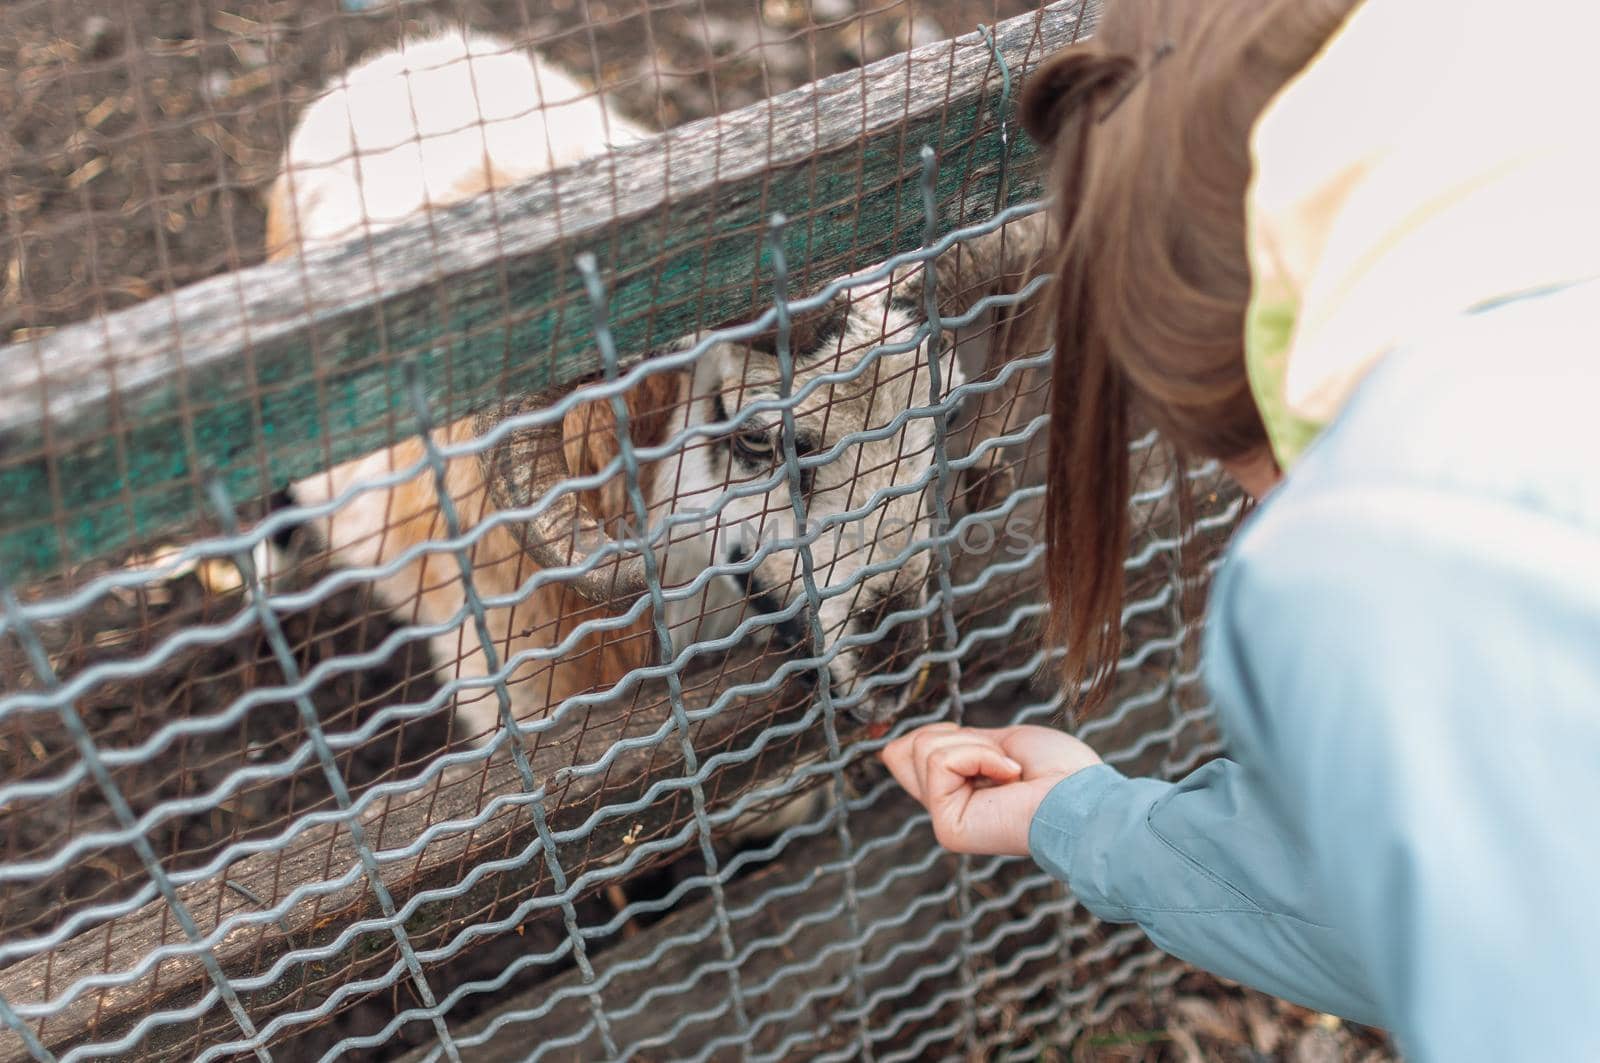 A girl feeds a white sheep with apples through a net in a cage. The mammal is in the zoo.